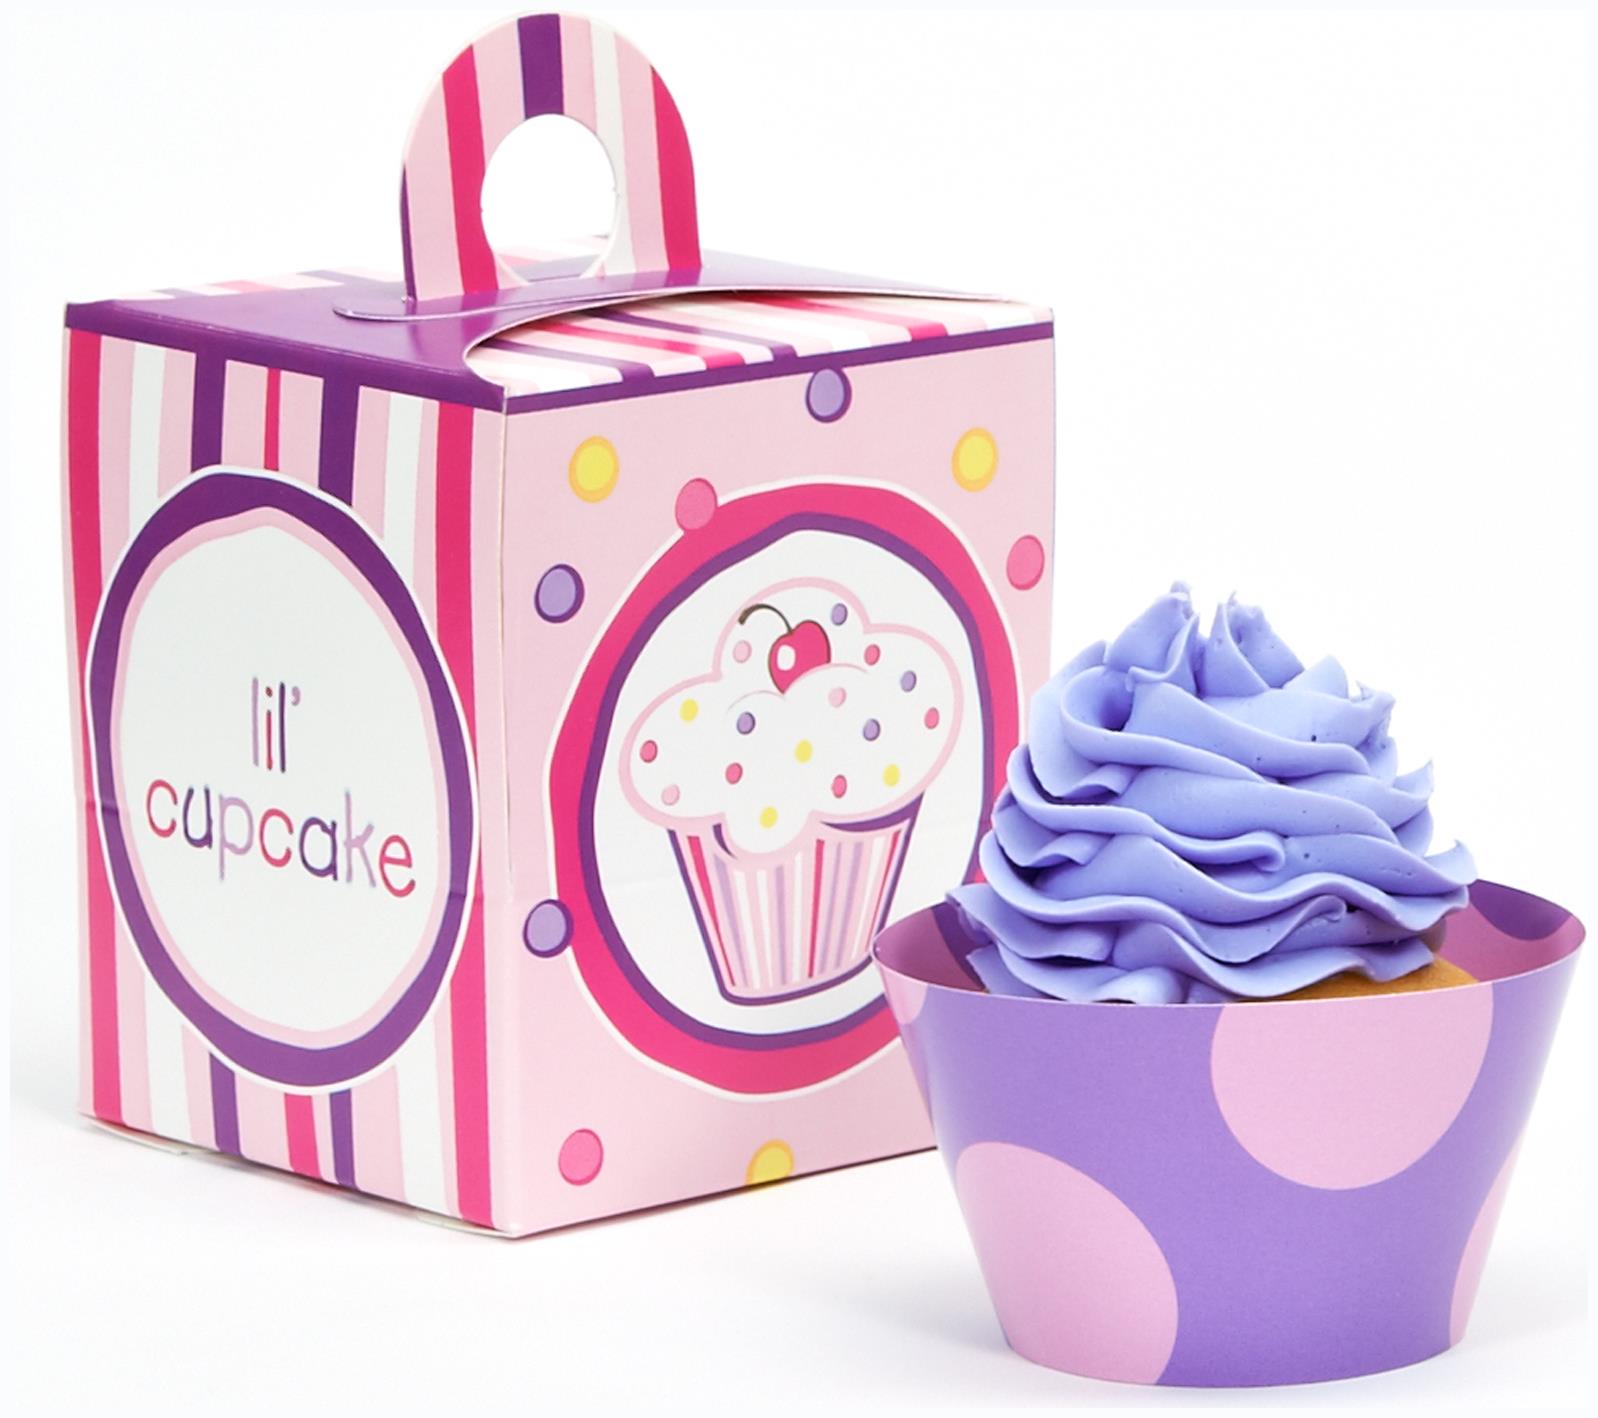 Insanely Cool New Packaging Designs for Cupcake Boxes.